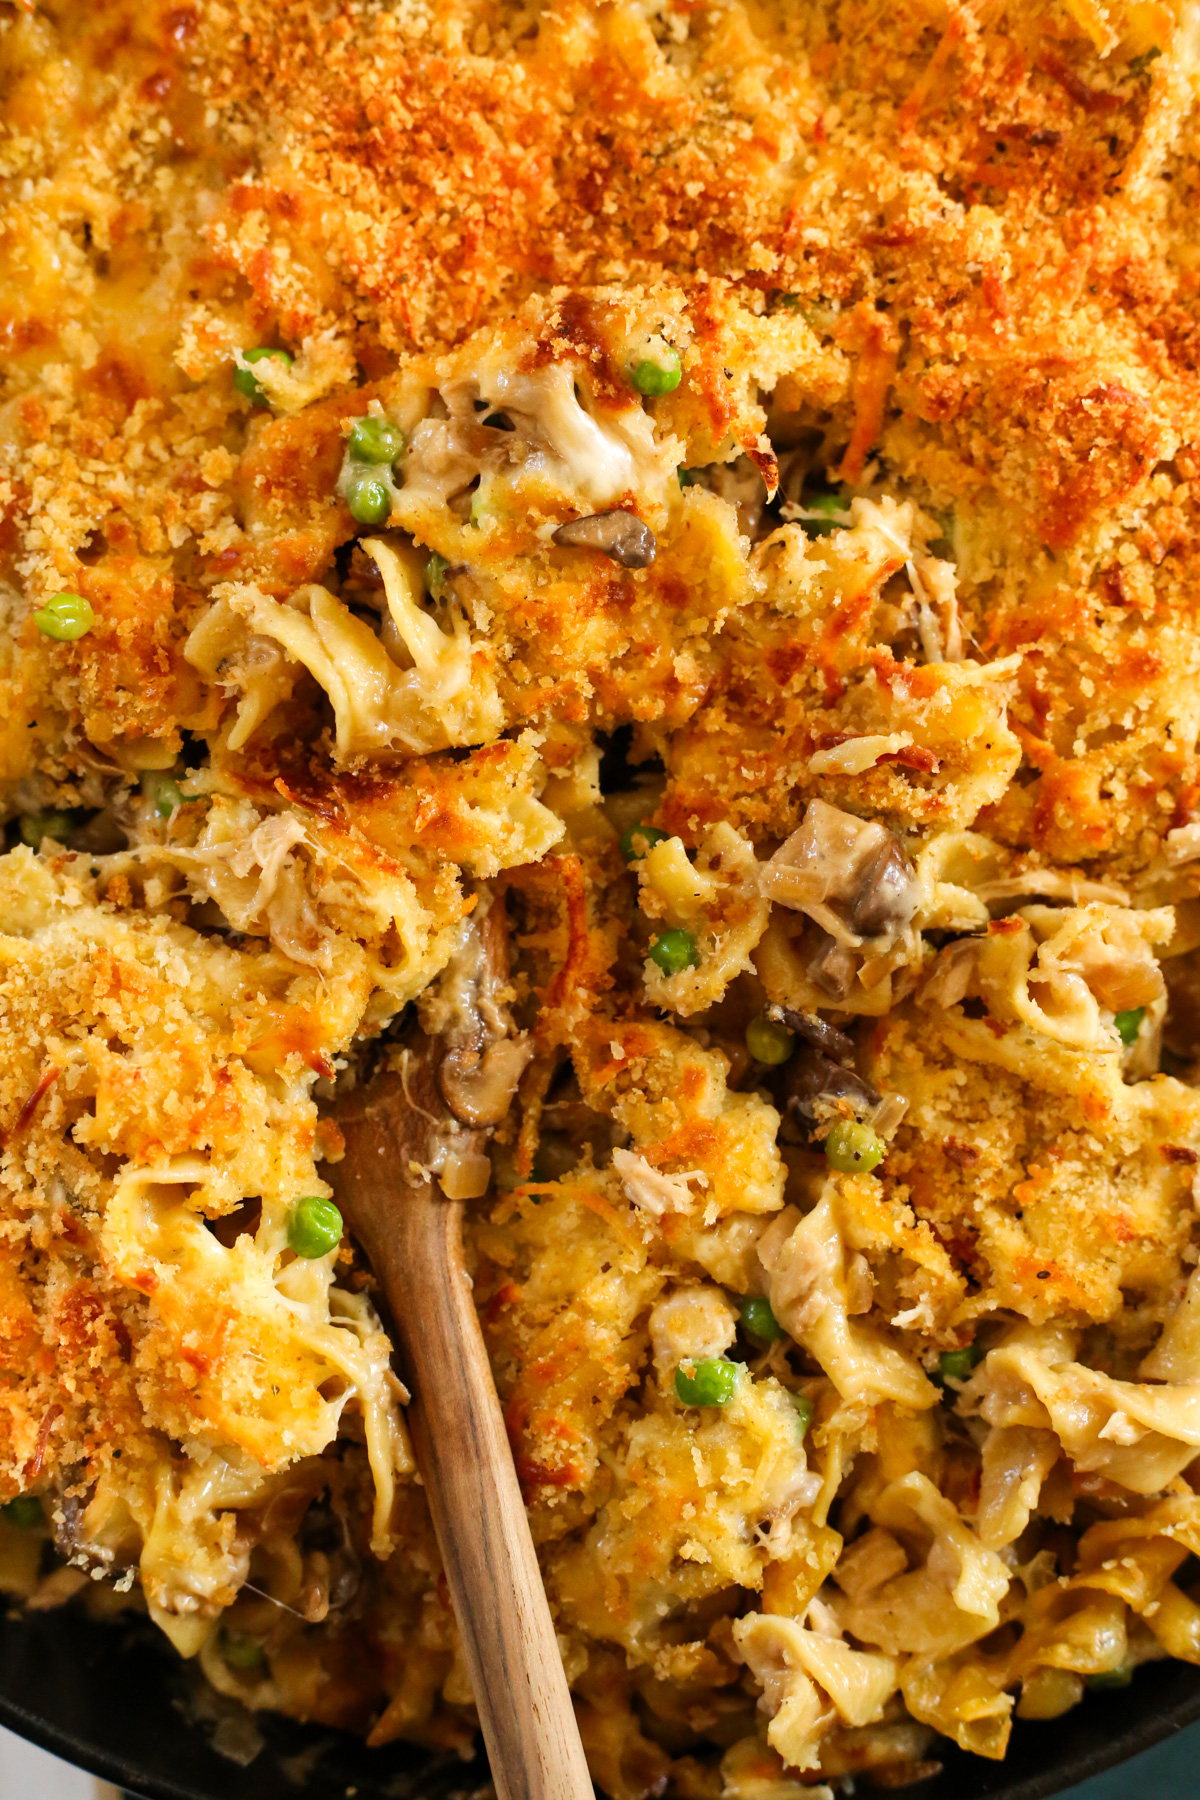 A close view of a wooden serving spoon nestled into the middle of a tuna noodle casserole recipe, a nostalgic type of comfort food